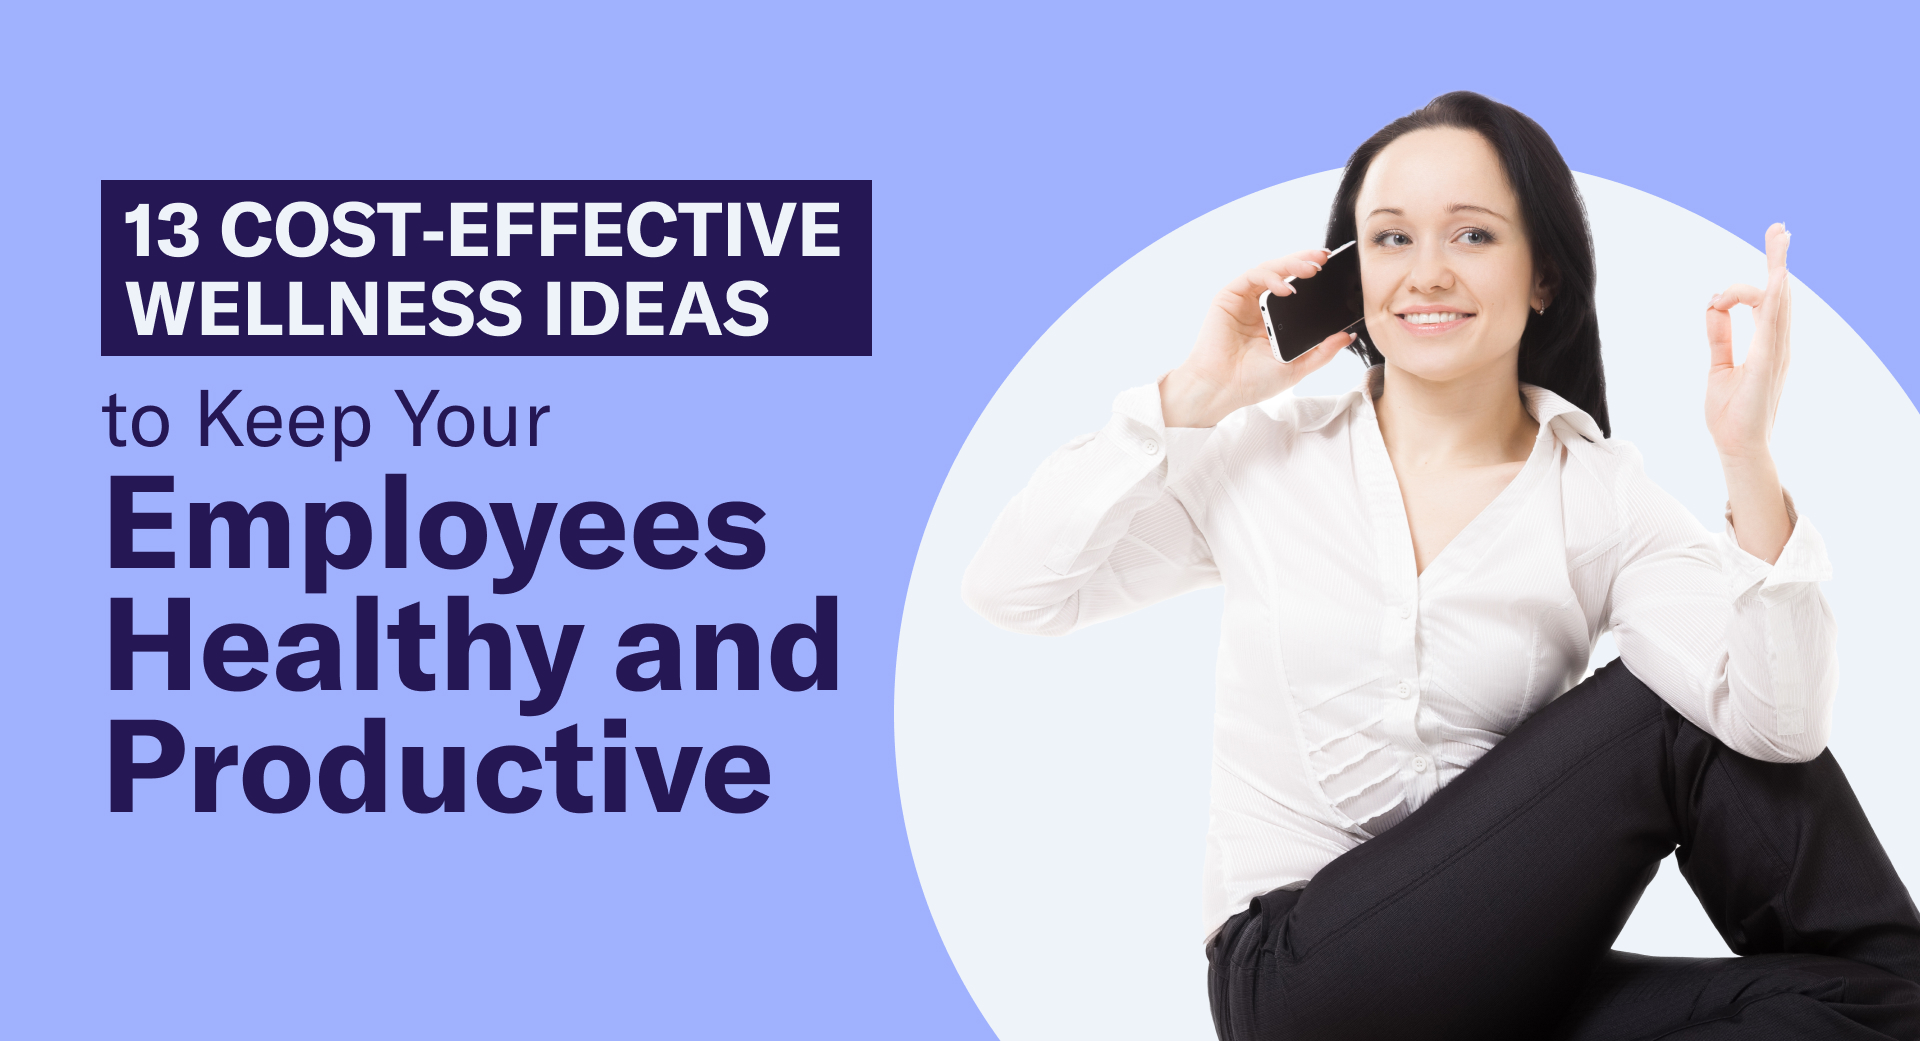 13 Cost-Effective Wellness Ideas to Keep Your Employees Healthy and Productive